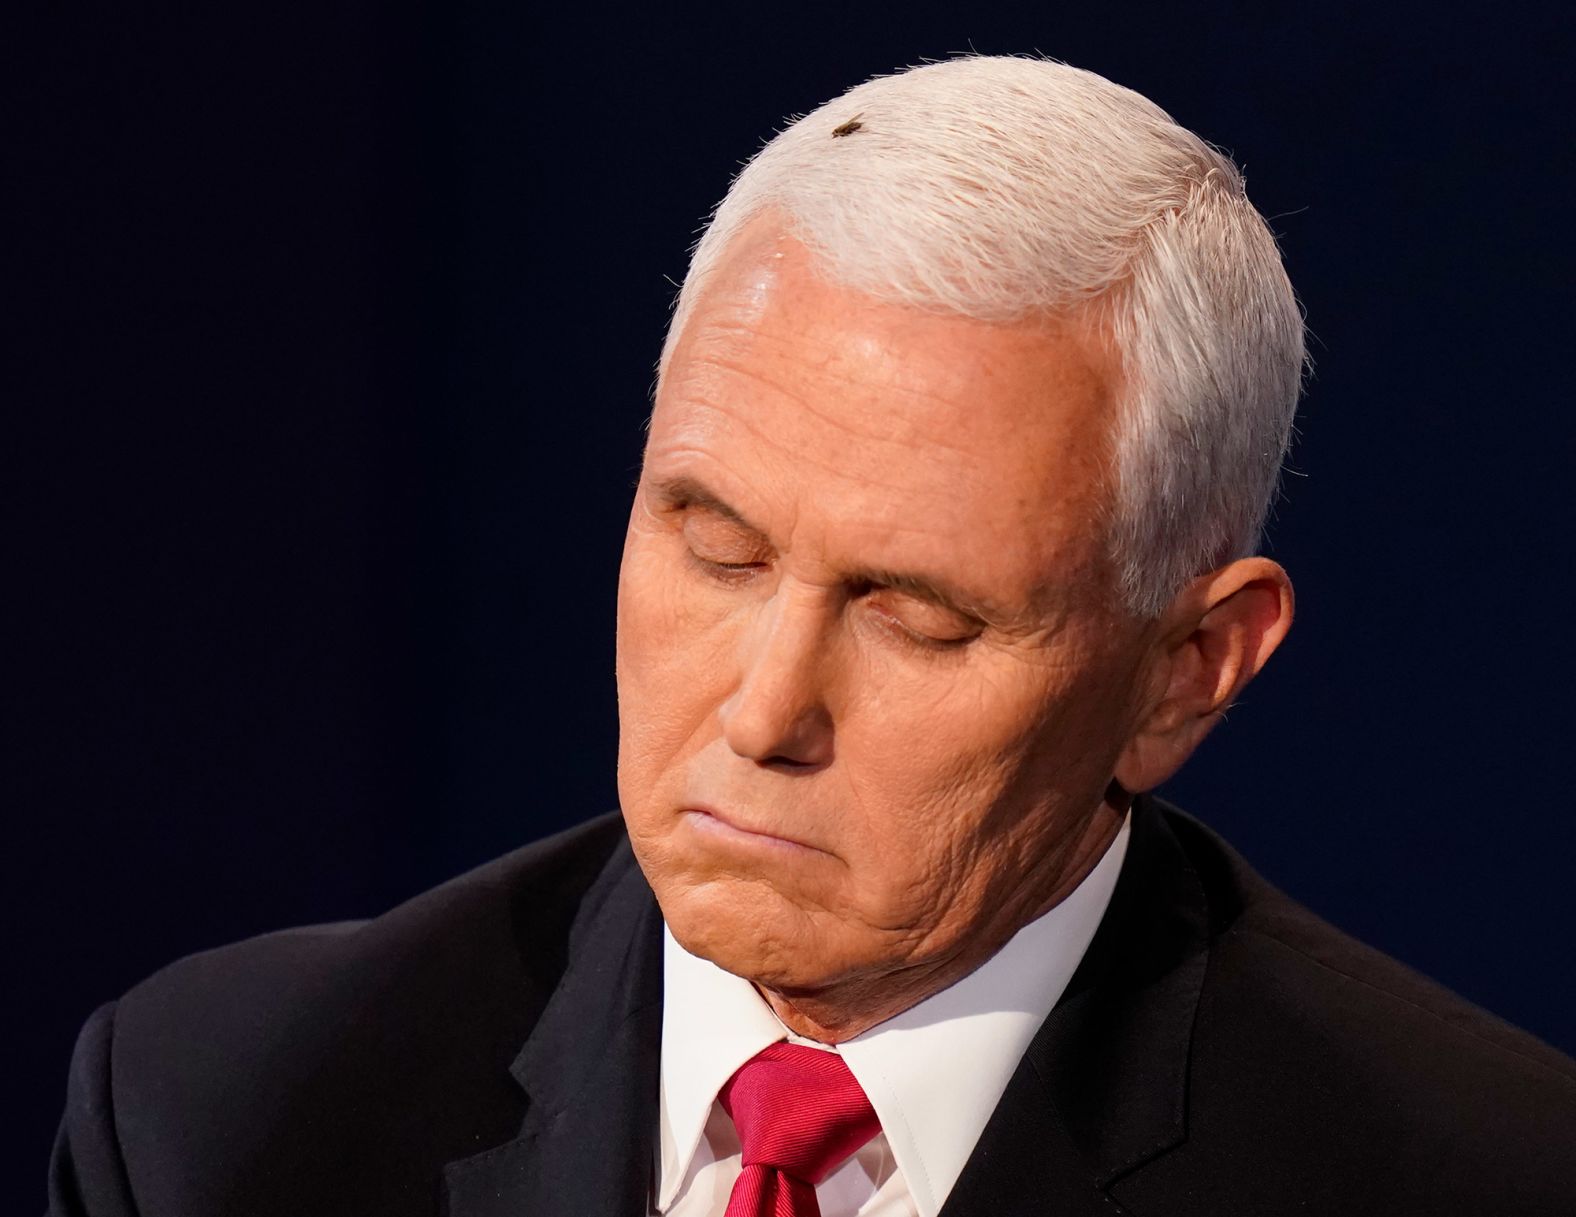 <a href="index.php?page=&url=https%3A%2F%2Fwww.cnn.com%2Fvideos%2Fpolitics%2F2020%2F10%2F08%2Fmike-pence-fly-on-head-debate-sot-vpx.cnn" target="_blank">A fly sits on Pence's head</a> during the debate. It became <a href="index.php?page=&url=https%3A%2F%2Fwww.cnn.com%2Fpolitics%2Flive-news%2Fvp-debate-coverage-fact-check-10-07-20%2Fh_6c072e0ba98c2c5ca7c1ae17076a5d41" target="_blank">a trending moment</a> on social media.